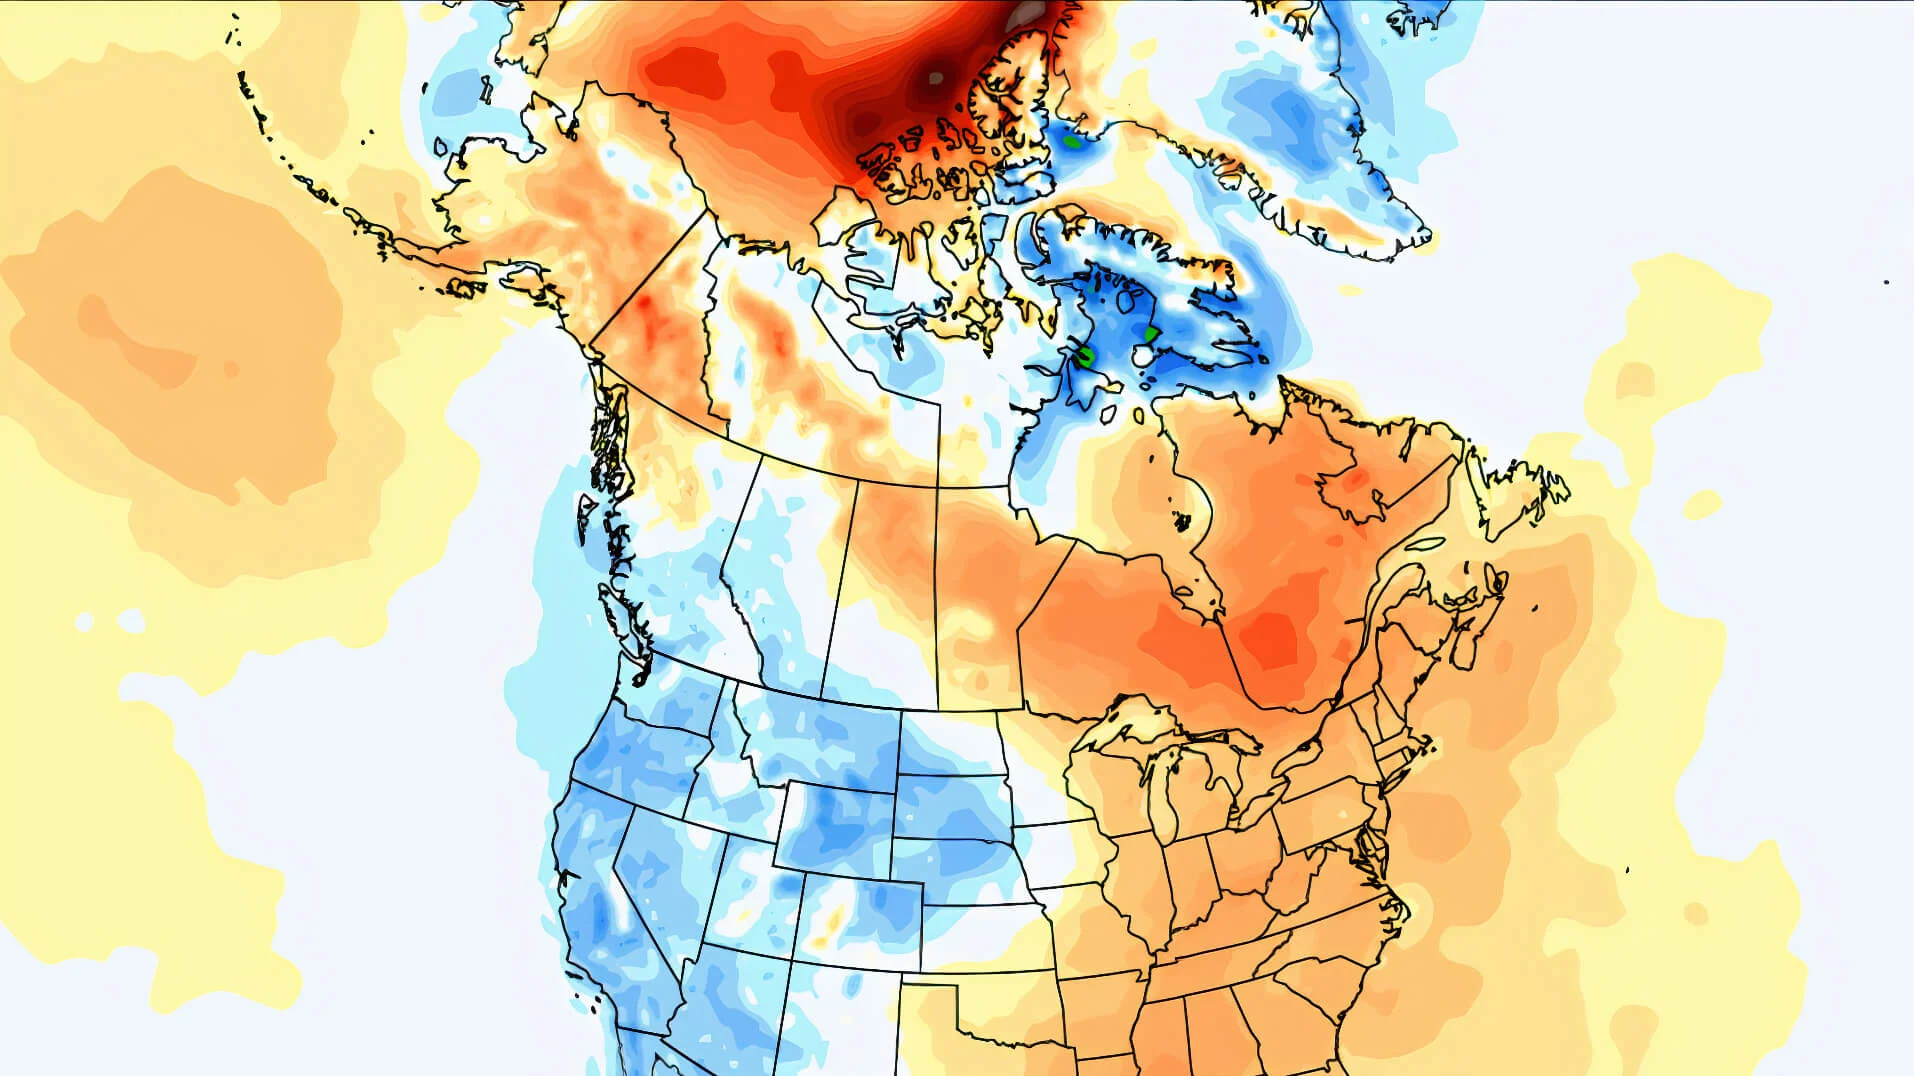 This was one of the warmest winters on record for parts of Canada